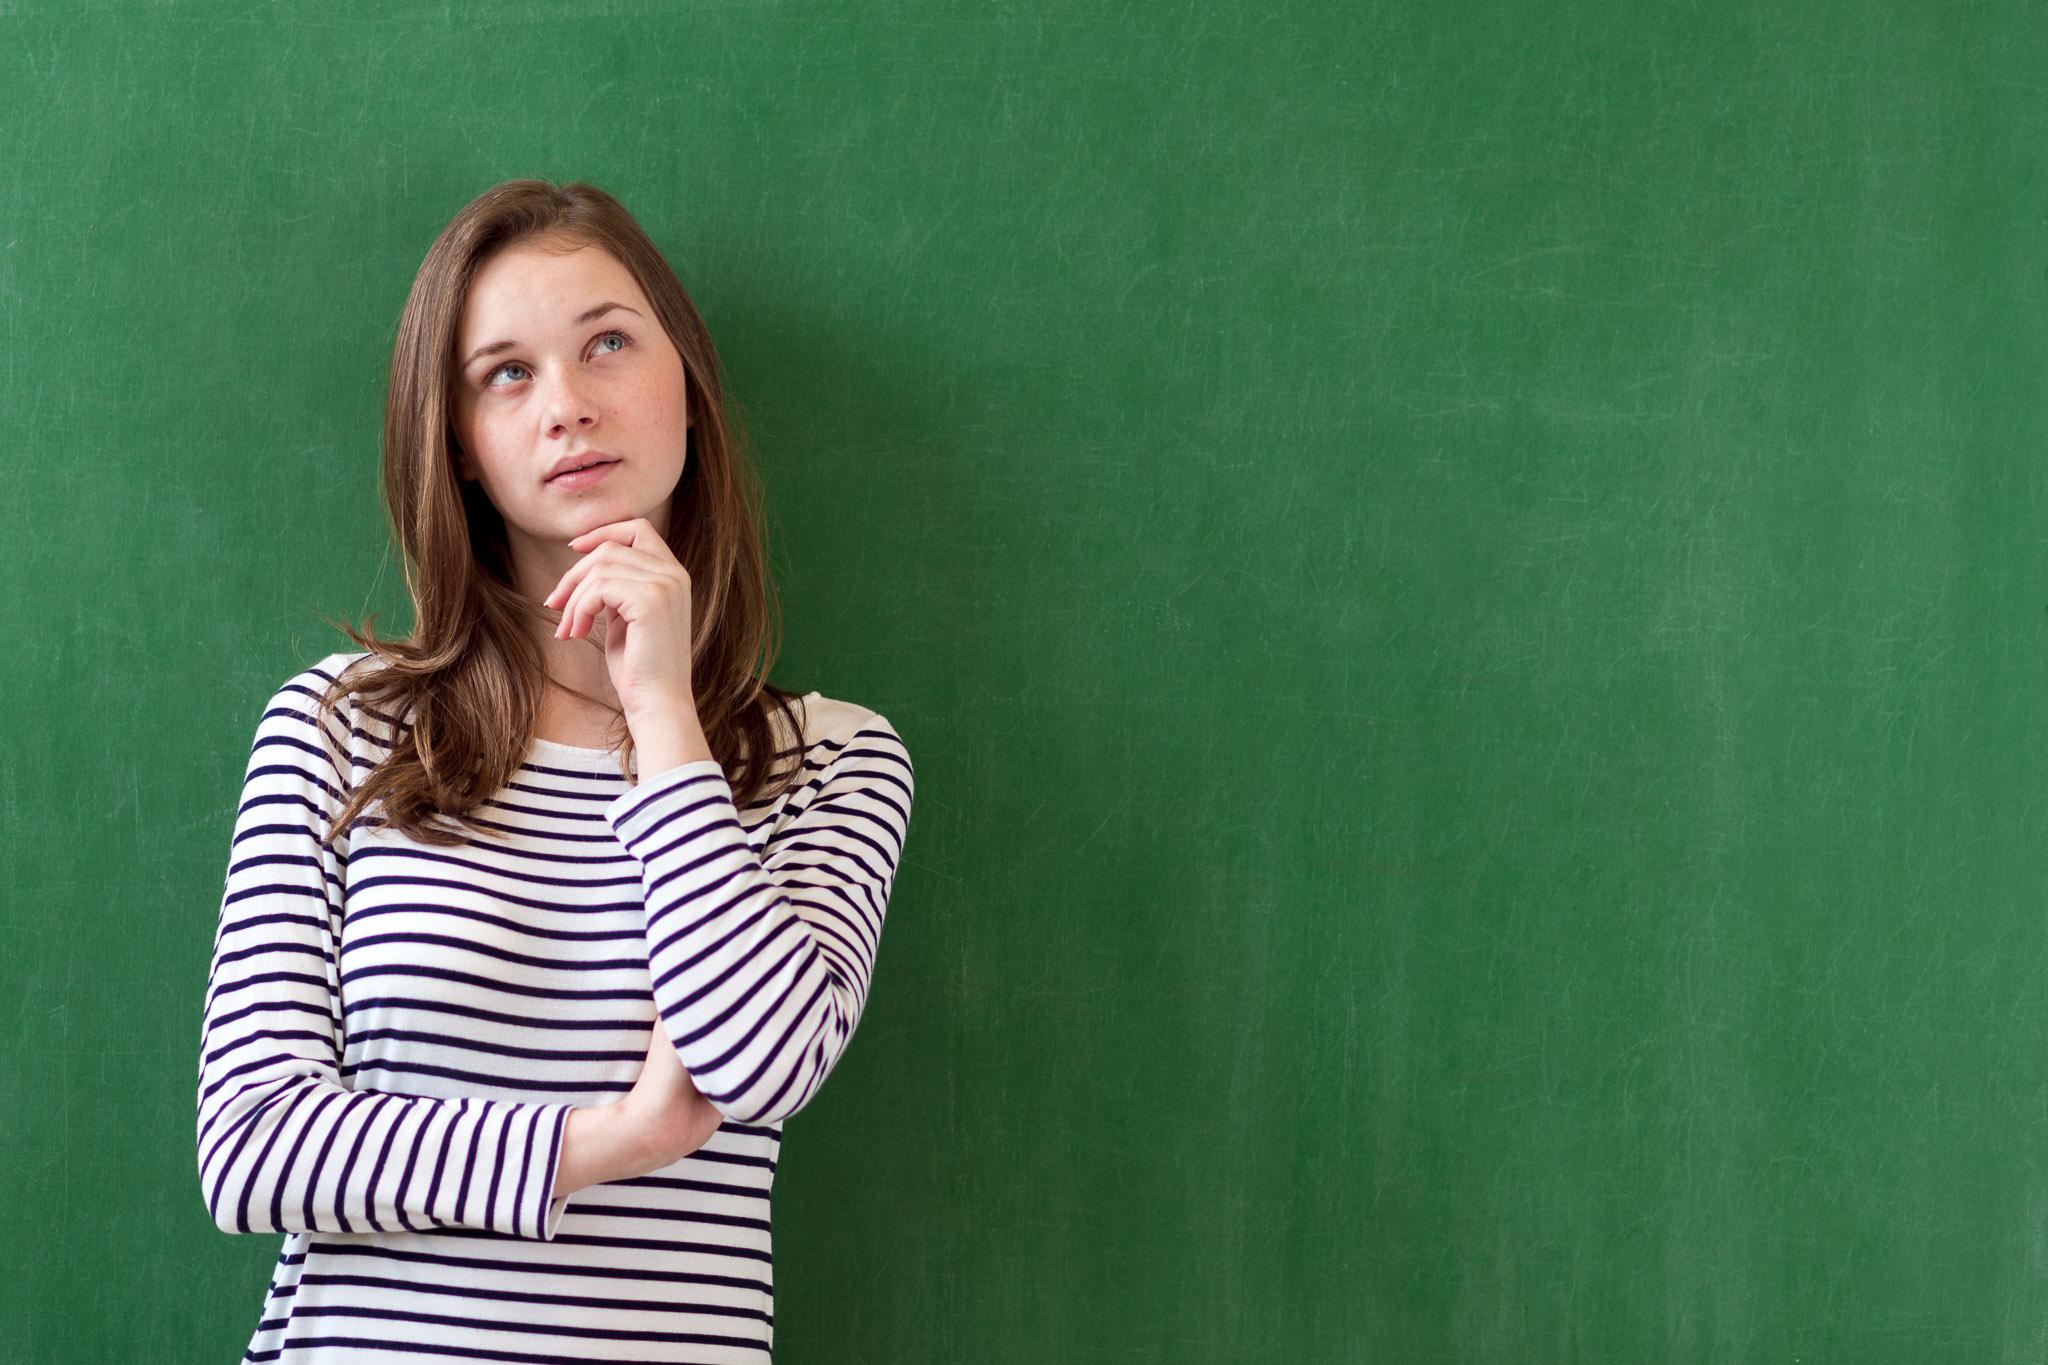 Student thinking and leaning against green chalkboard background. Pensive girl looking up. Caucasian female student portrait with copy space. Imagination, ideas, future, possibilities concept.